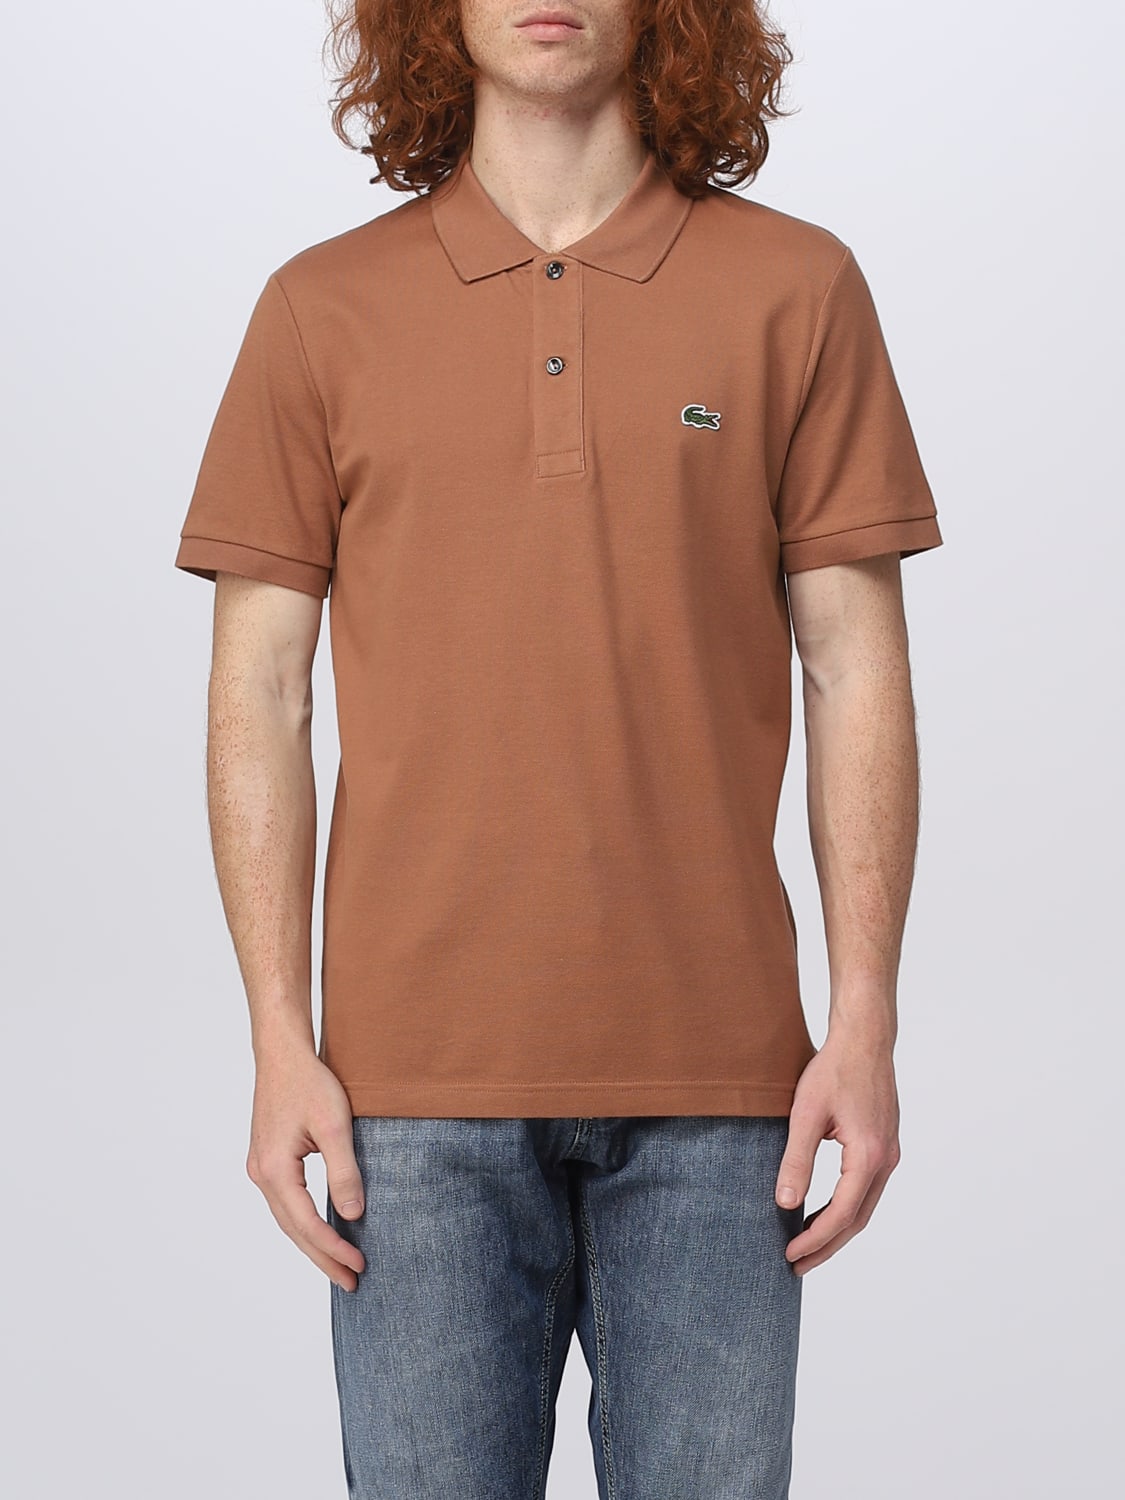 Sandet At understrege Bevægelse LACOSTE: polo shirt for man - Brown | Lacoste polo shirt PH4012 online on  GIGLIO.COM